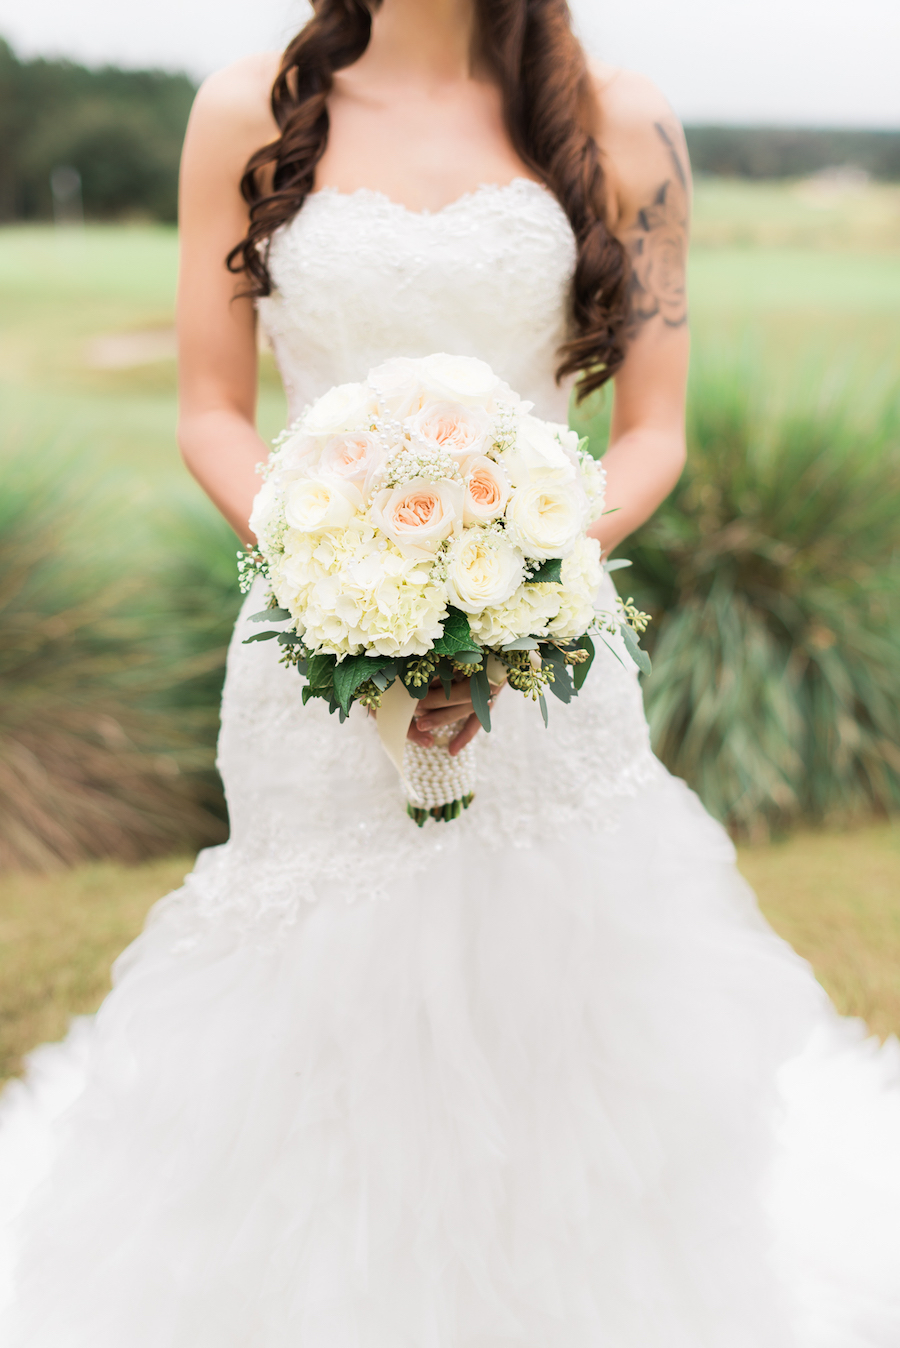 utdoor, Bridal Wedding Portrait in Ivory, Lace Strapless Wedding Gown and Ivory and Blush Pink Wedding Bouquet of Flowers